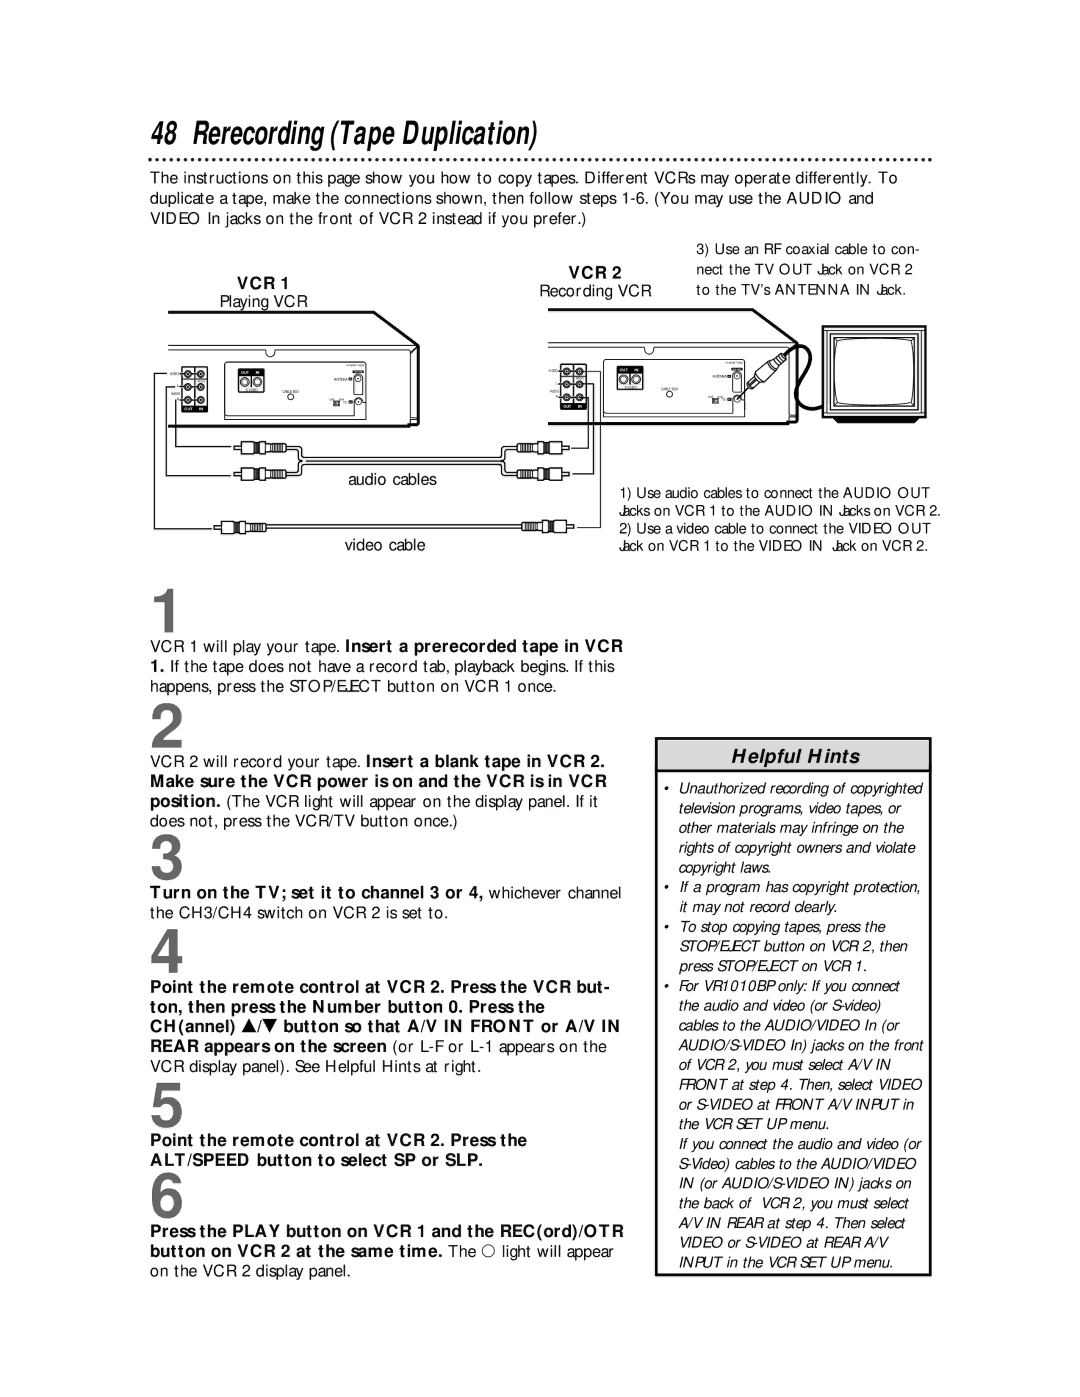 Philips VR810BPH owner manual Rerecording Tape Duplication, VCR 1 will play your tape. Insert a prerecorded tape in VCR 